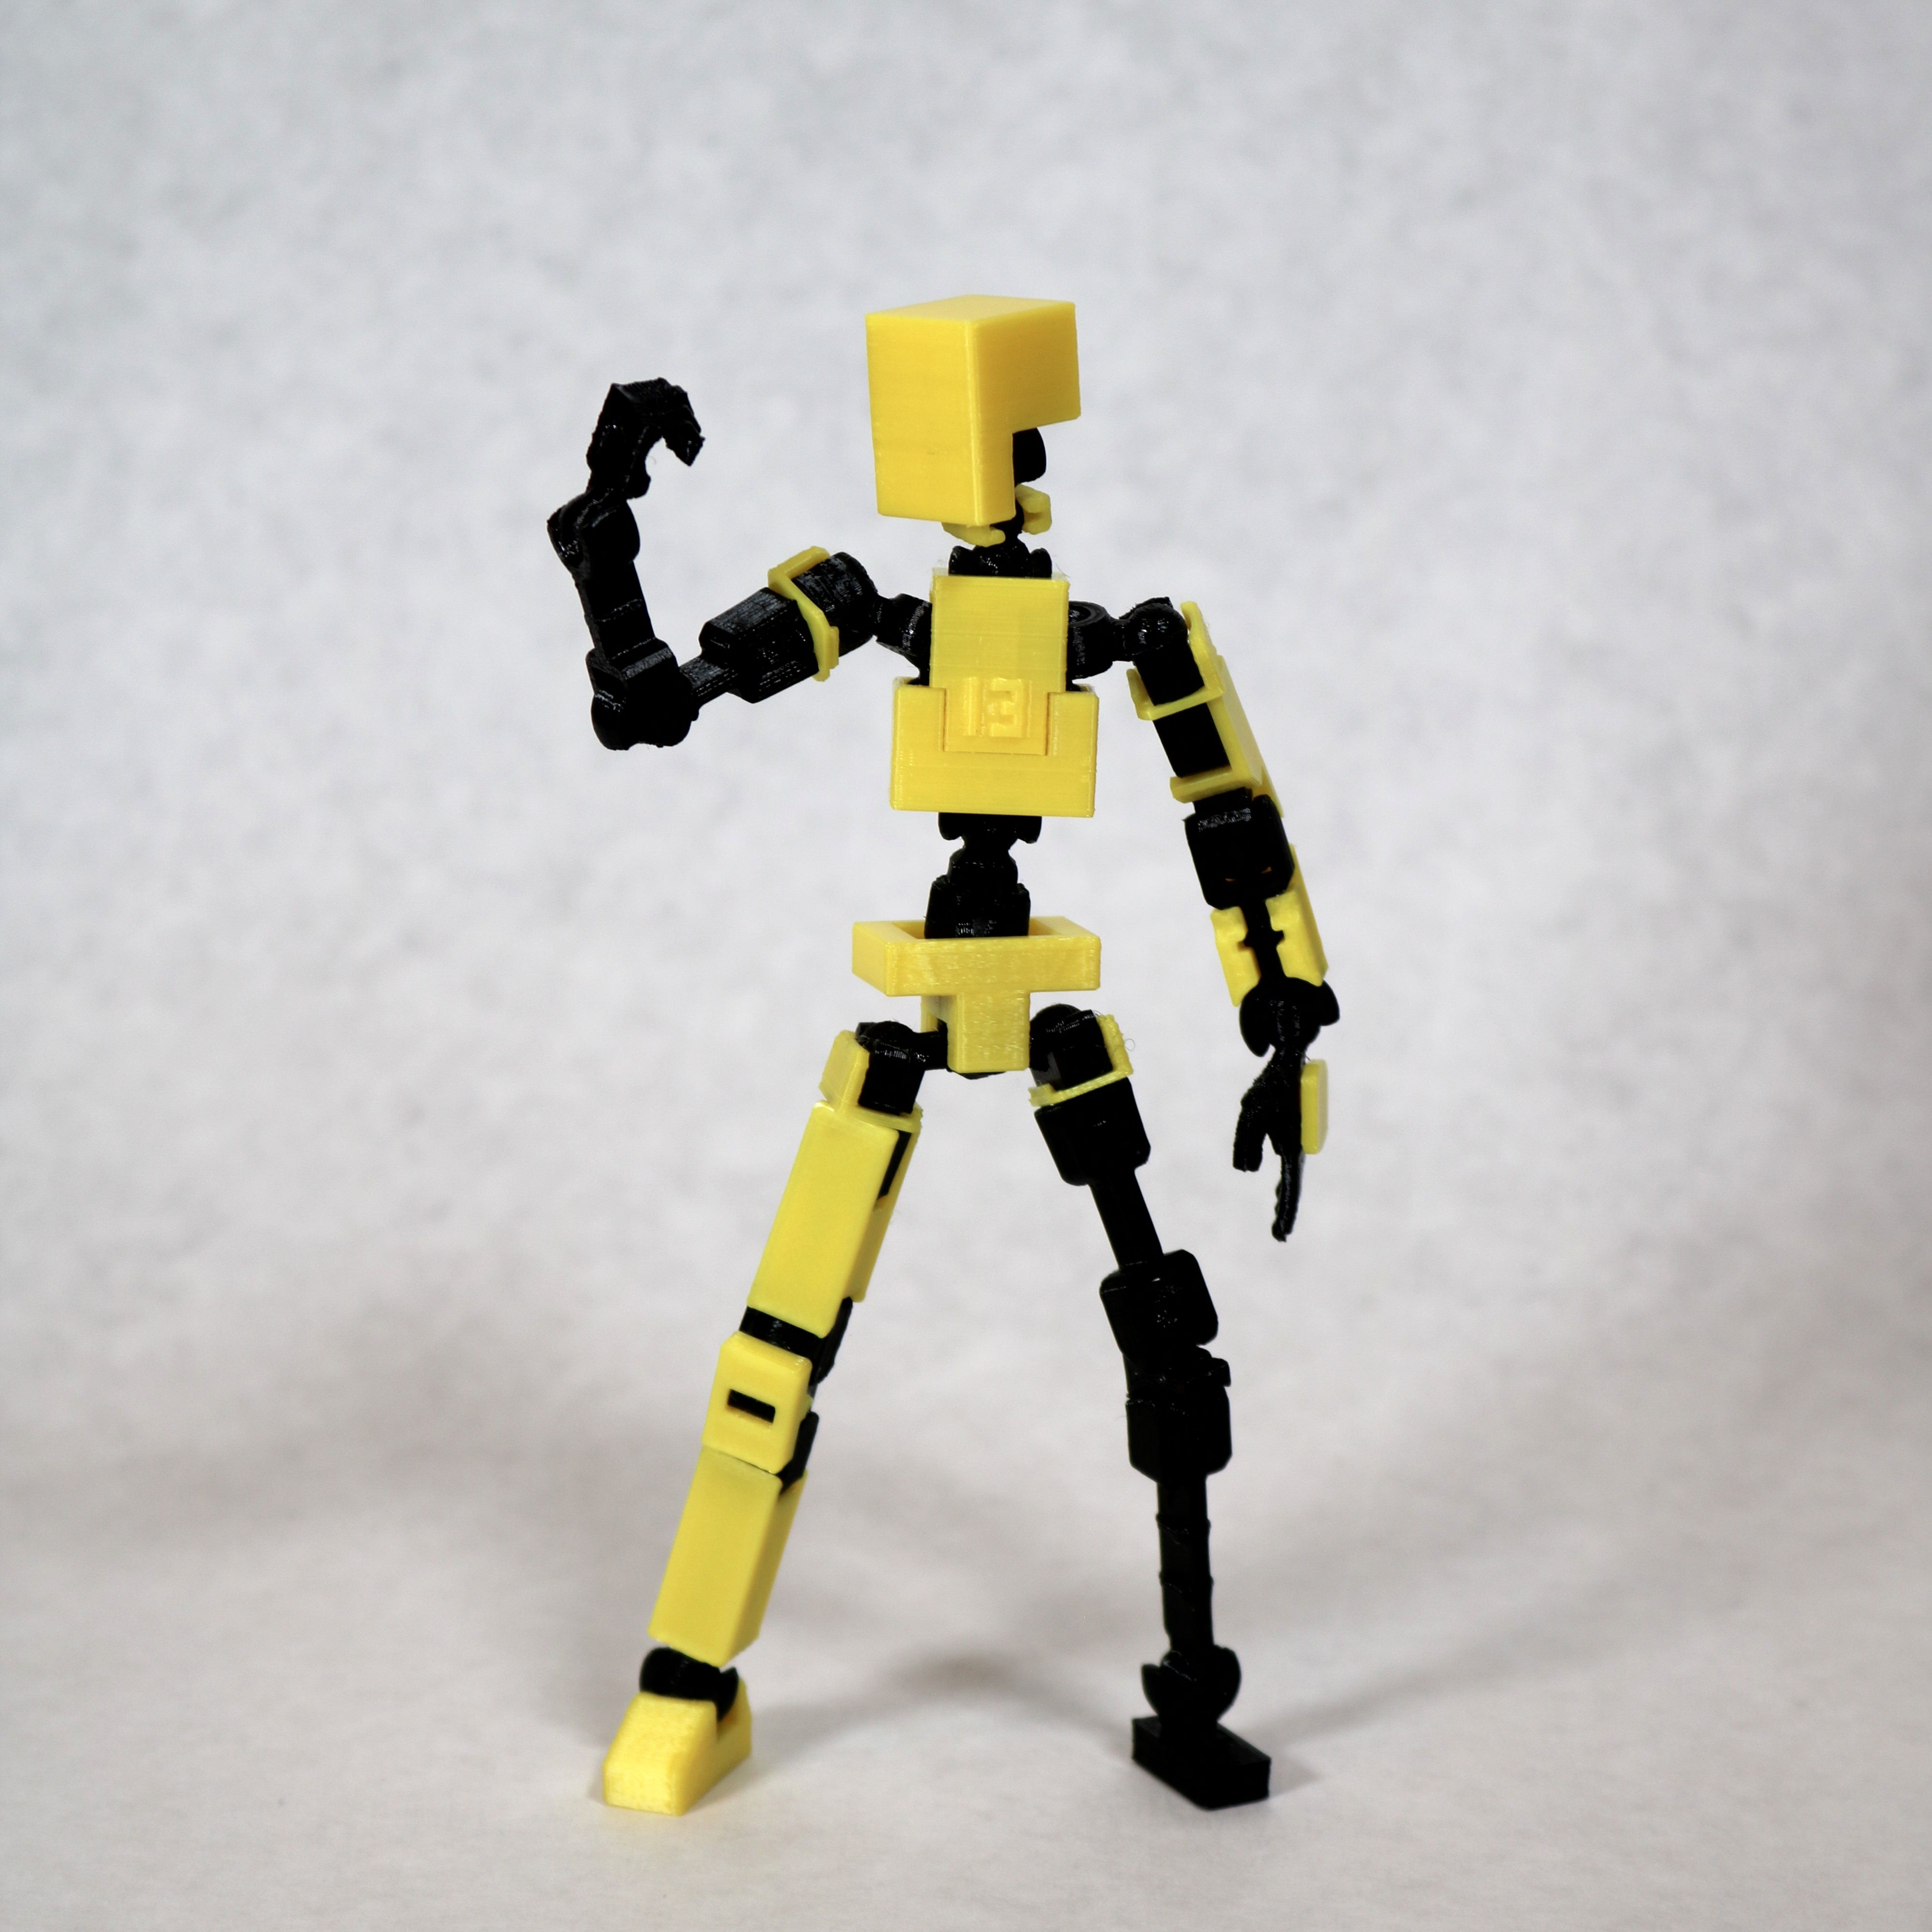 LUCKY 13 Printable Jointed Figure by soozafone Download free STL